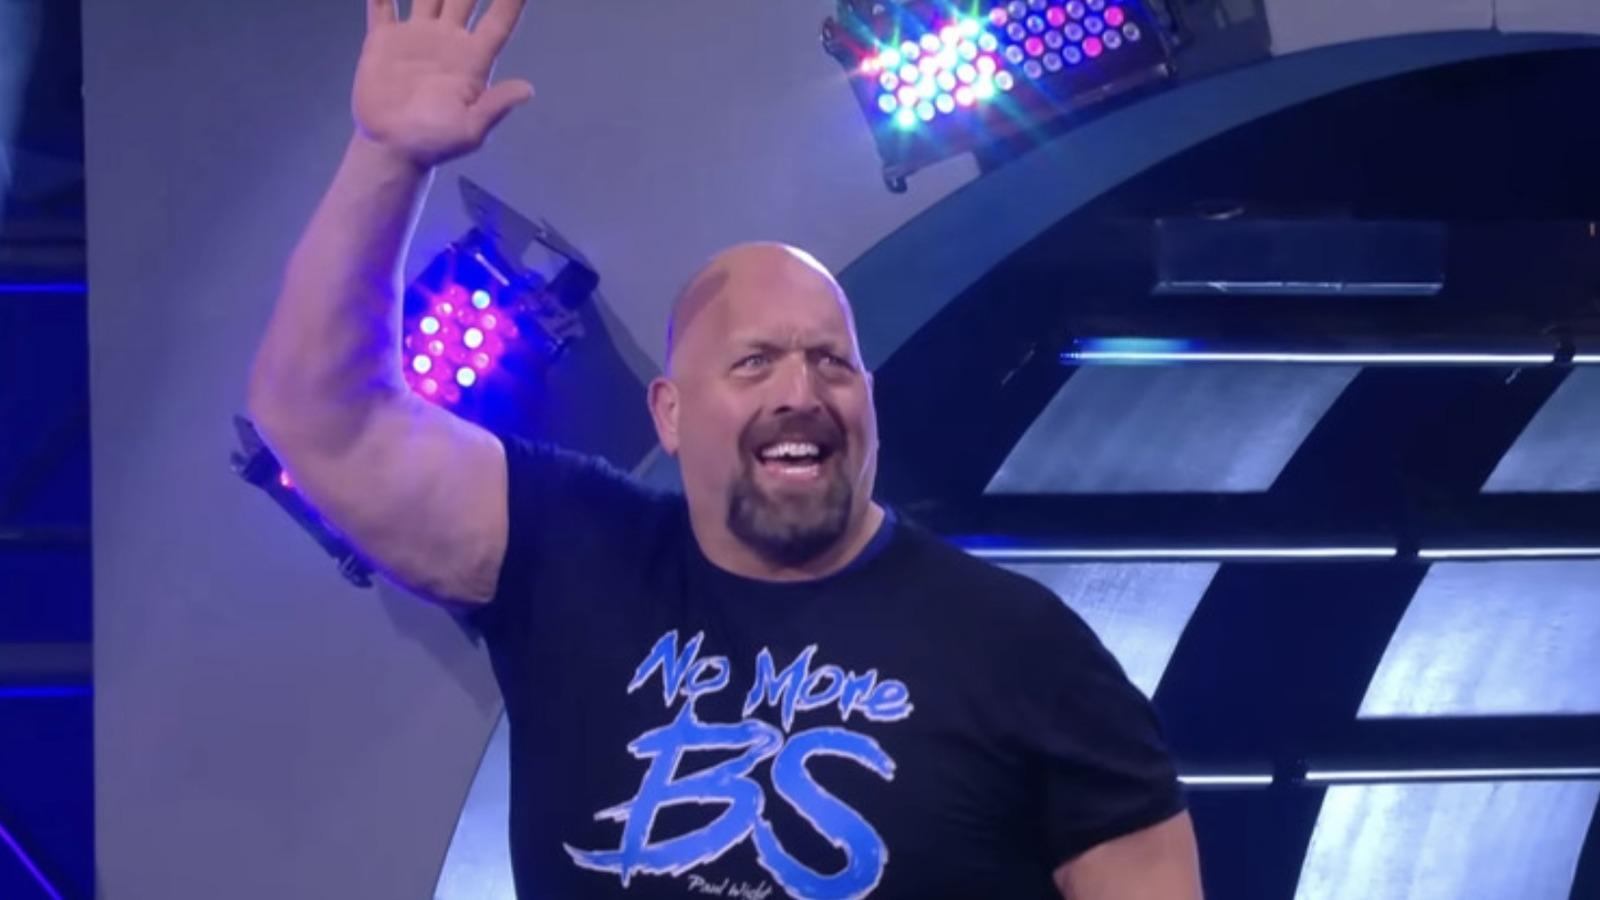 Paul “Big Show” Wight left the WWE in 2021, but fans are still holding out hope for a return.